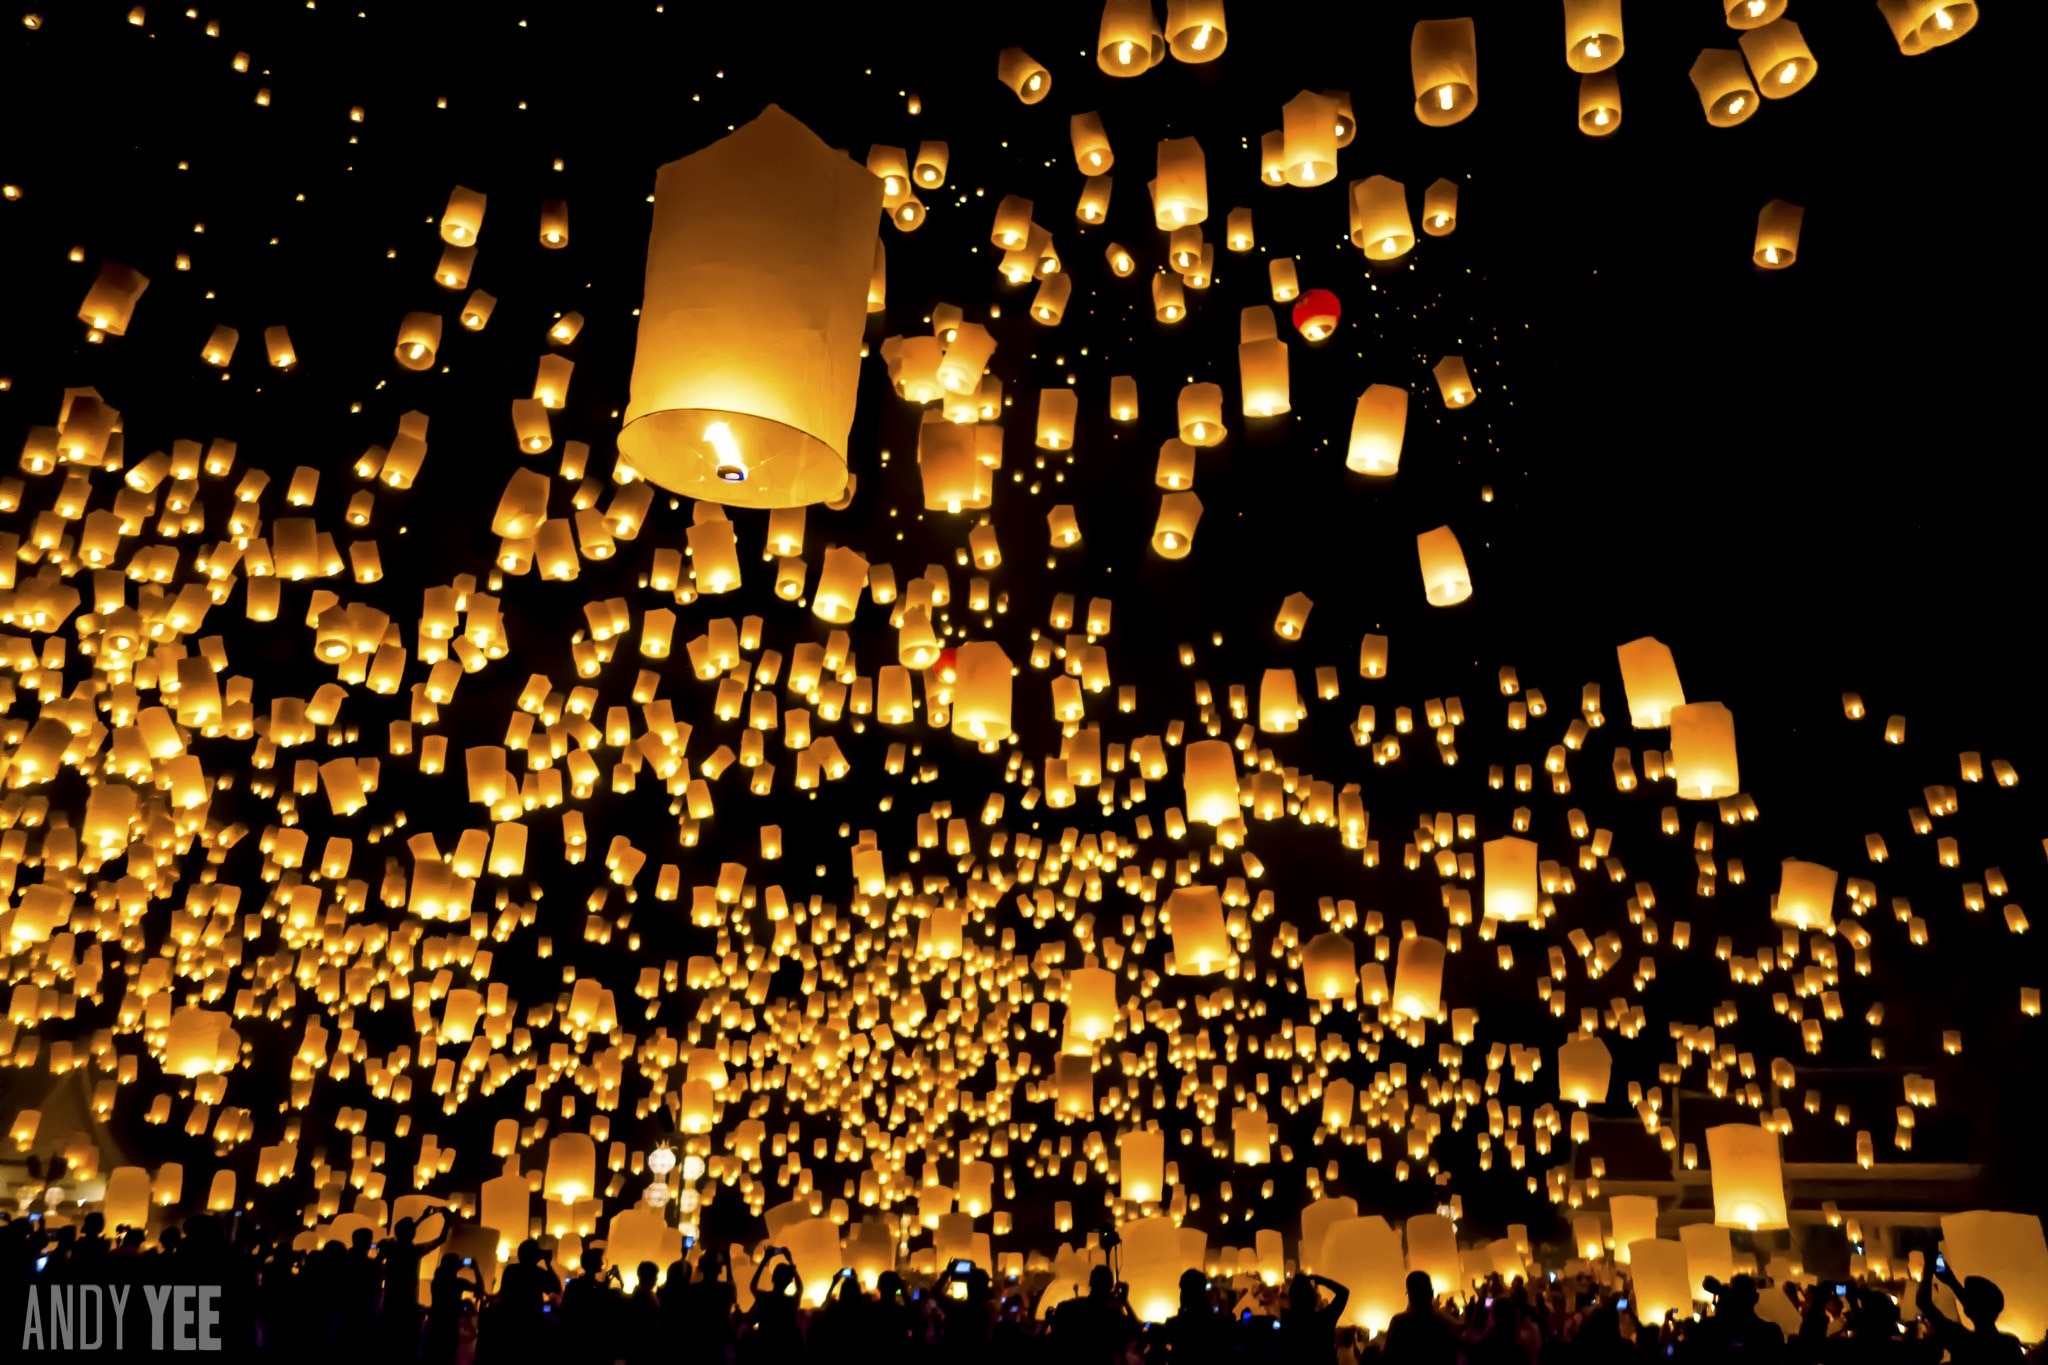 Yi Peng festival in November every year in Thailand. The Maejo University is north of Chiang Mai and can be reached by scooter or bus. For more information on the event, check out my article here http://www.traveltherenext.com/play/item/538-yi-peng-sky-lantern-festival-in-chiangmai